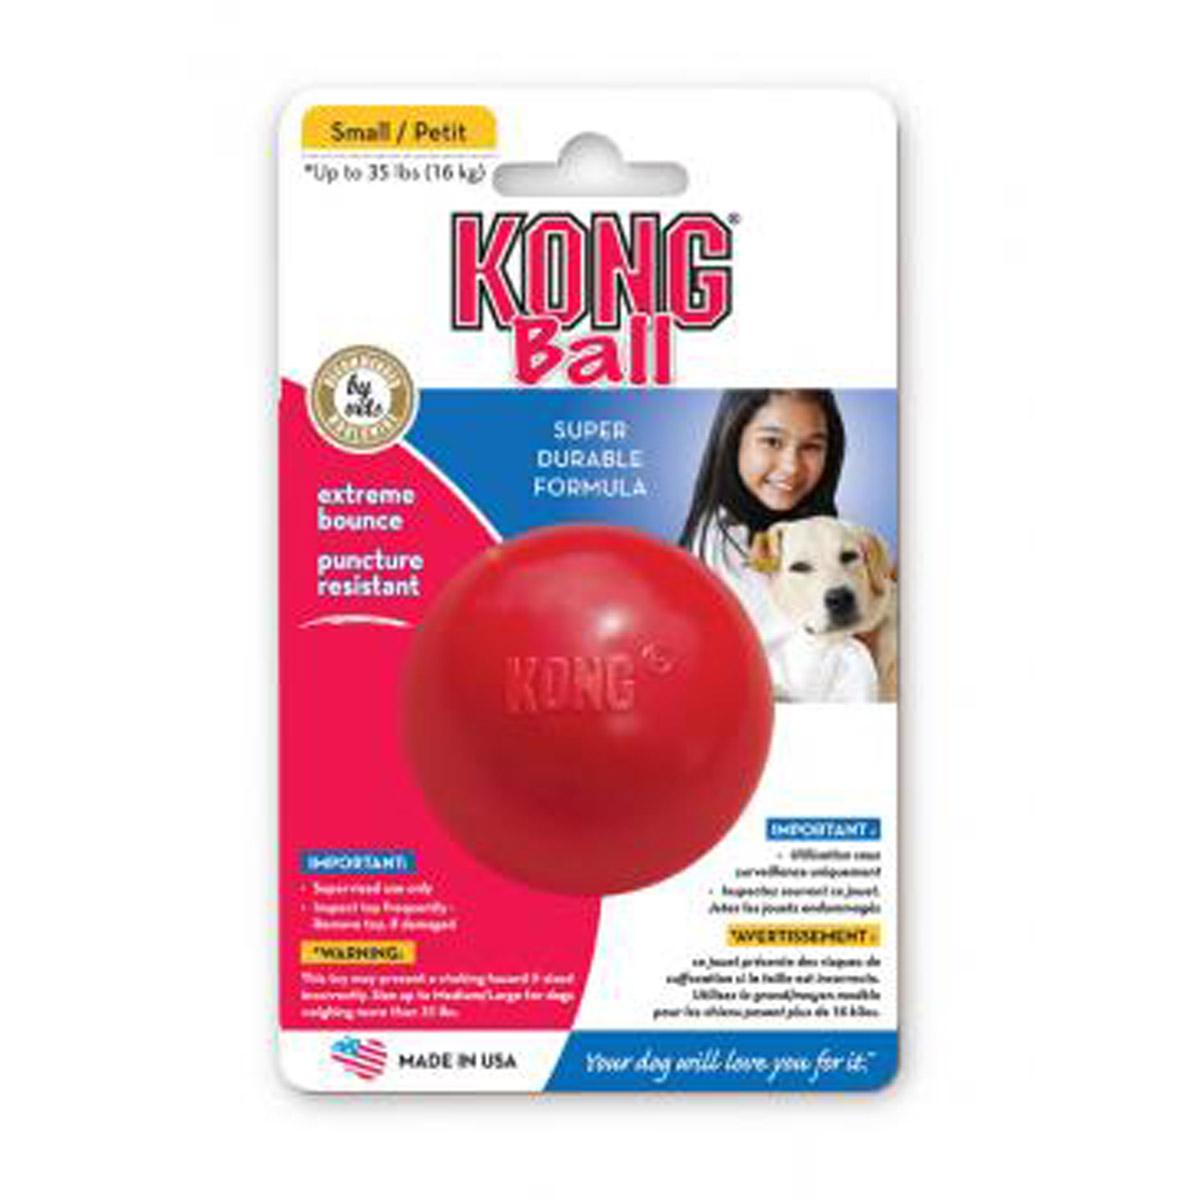 KONG Ball Rubber Dog Toy